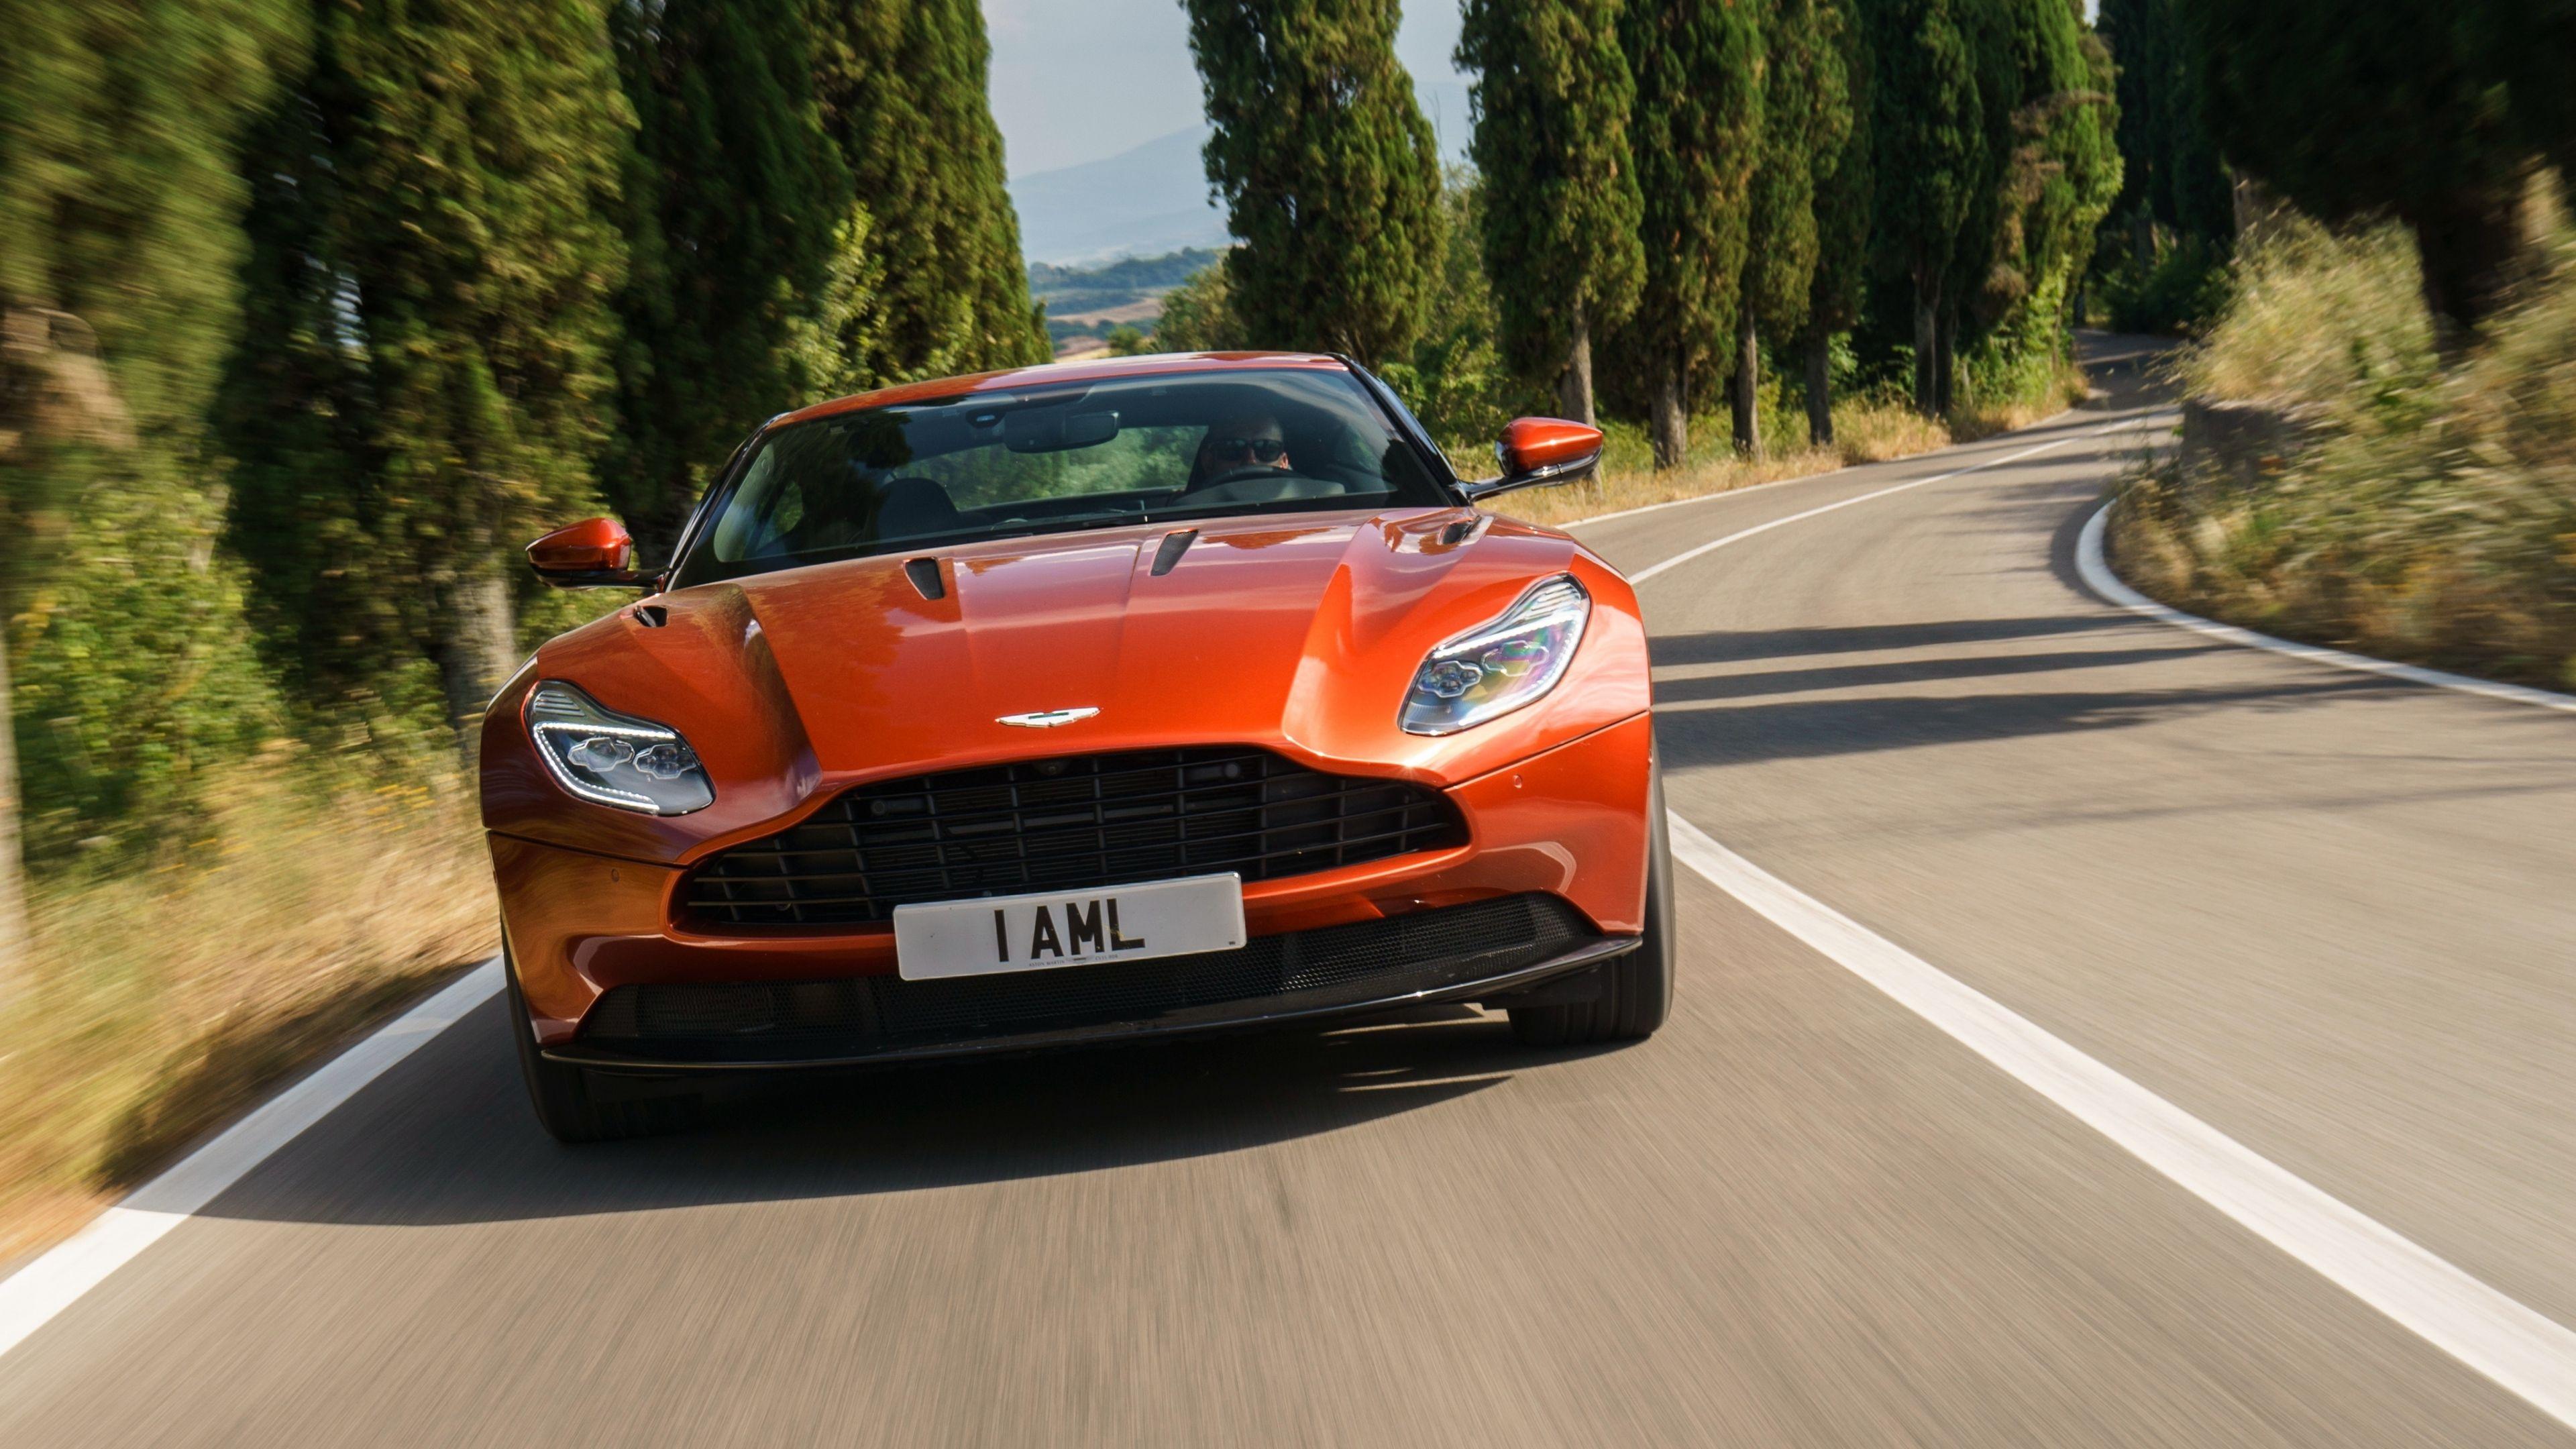 Download Wallpaper 3840x2160 Aston martin, Db Front view, Red